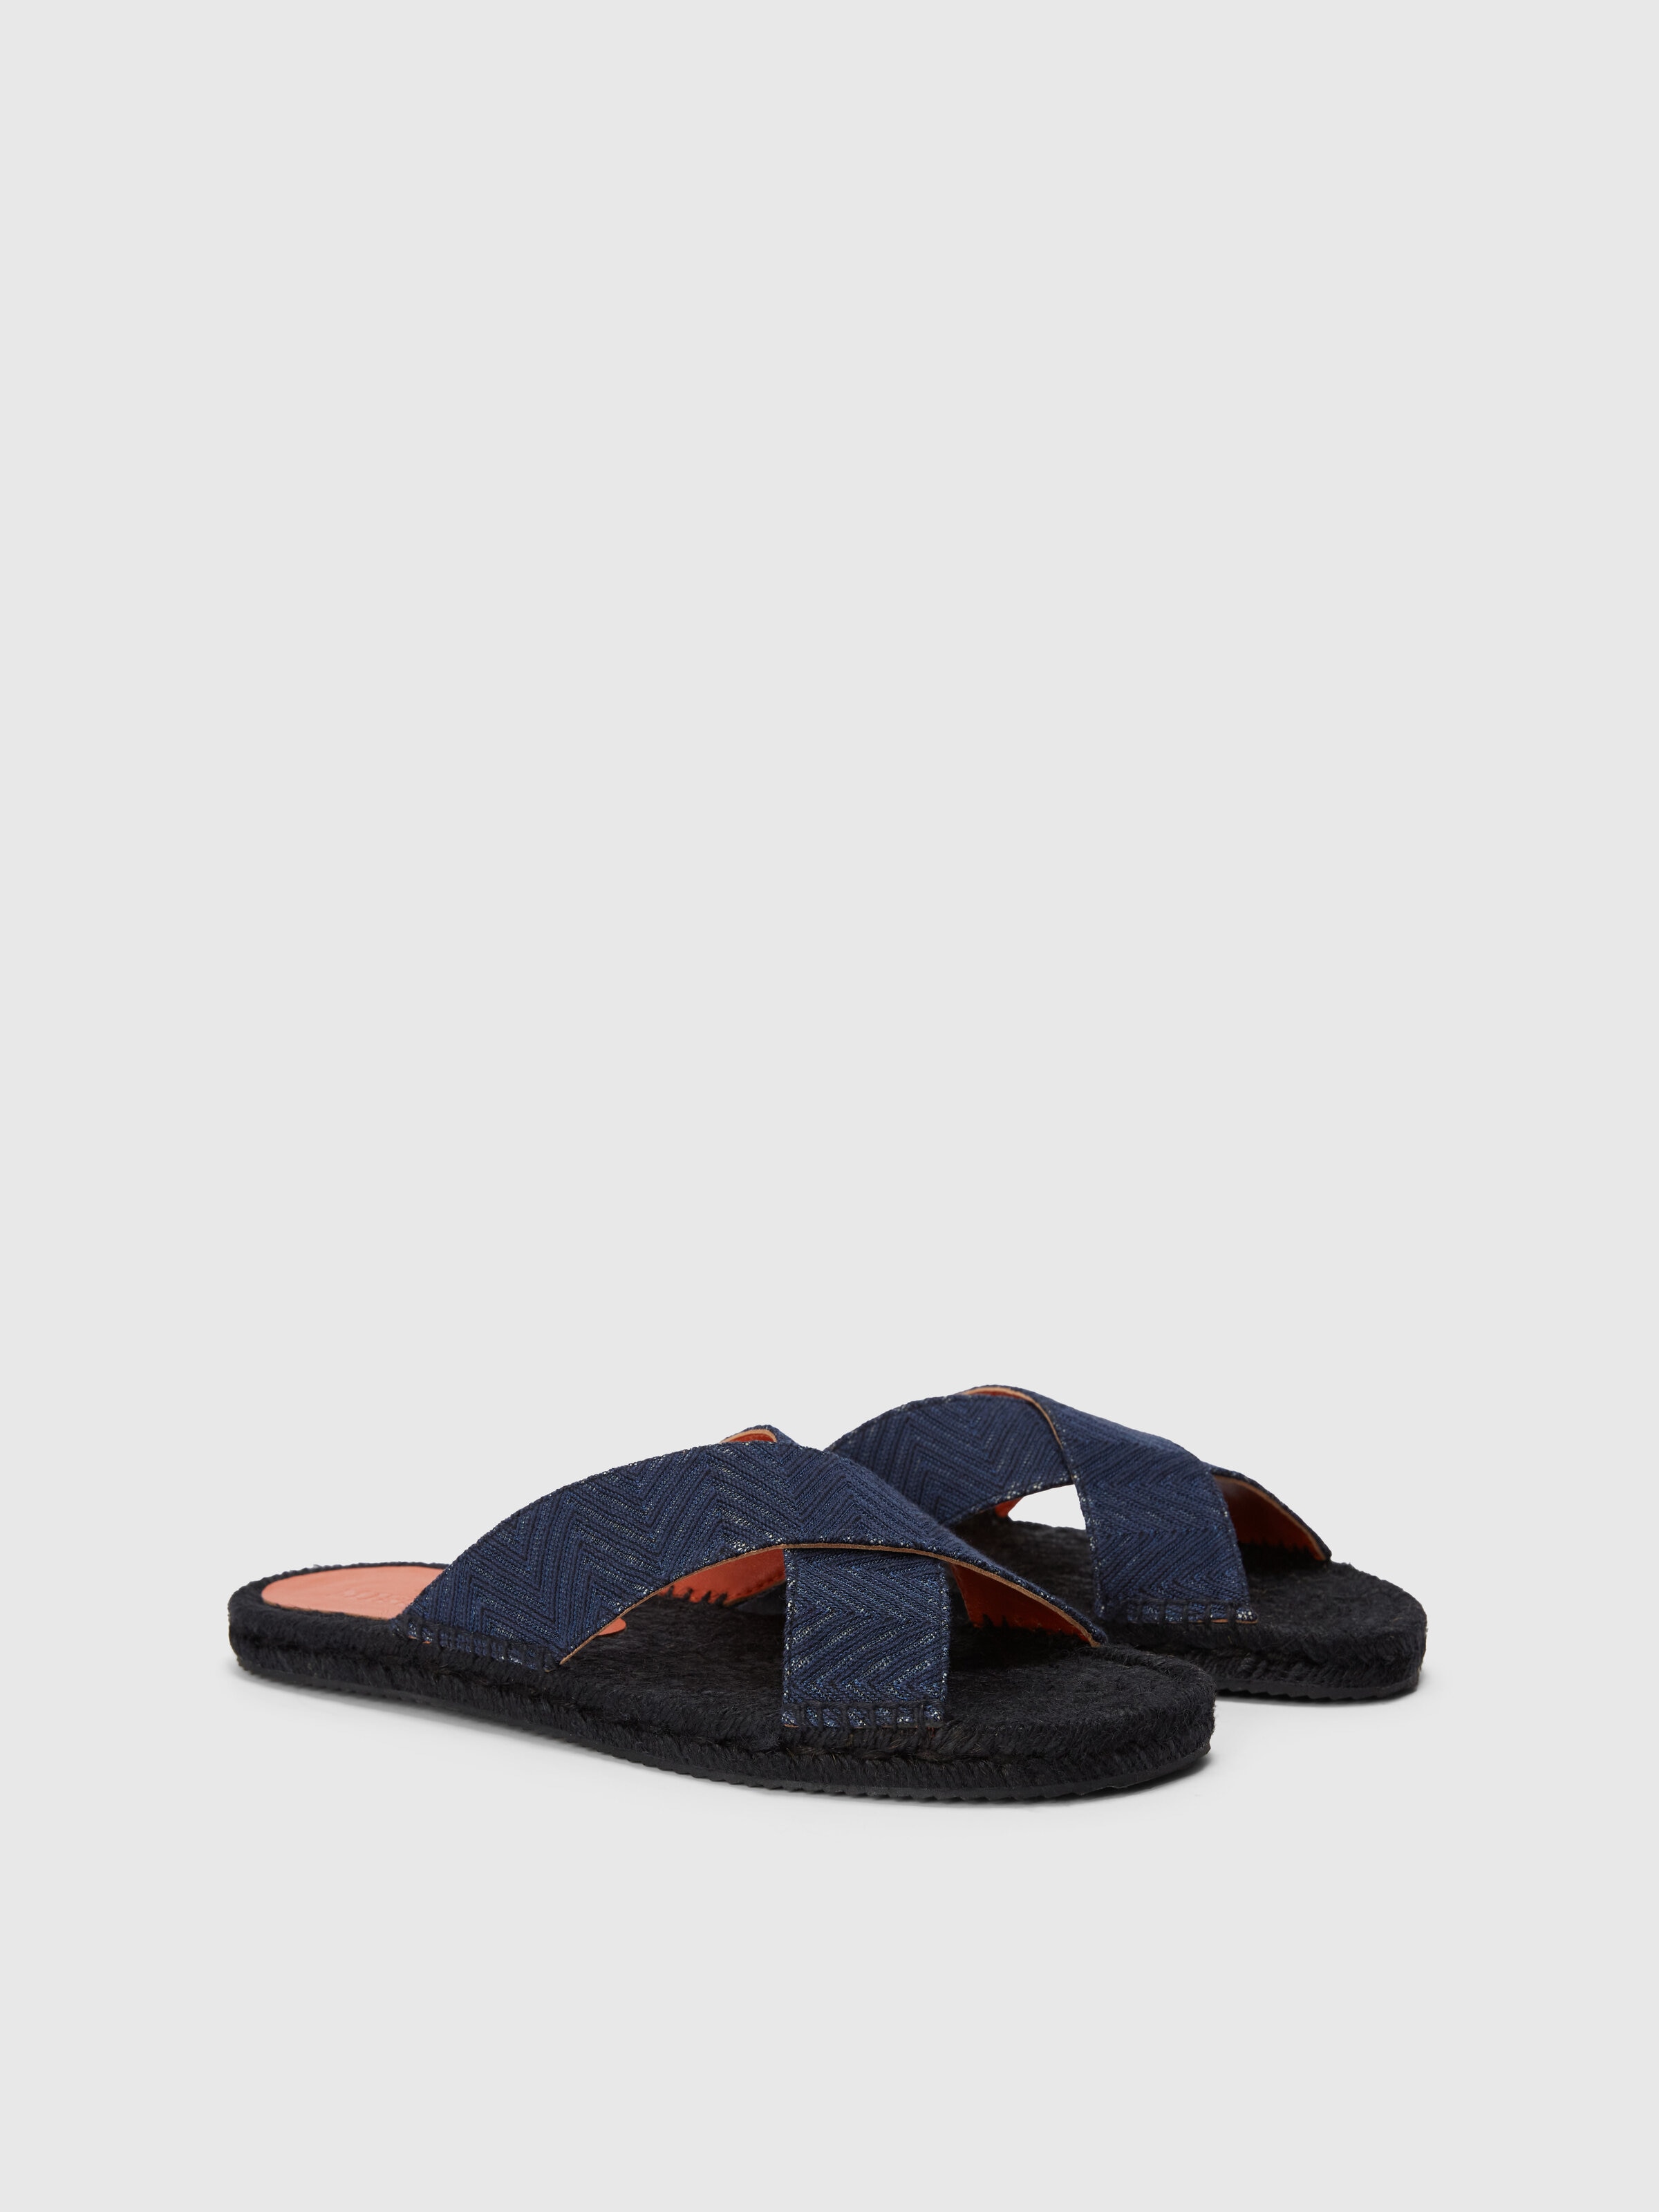 Slippers with double crossed strap and chevron pattern   , Navy Blue  - 1